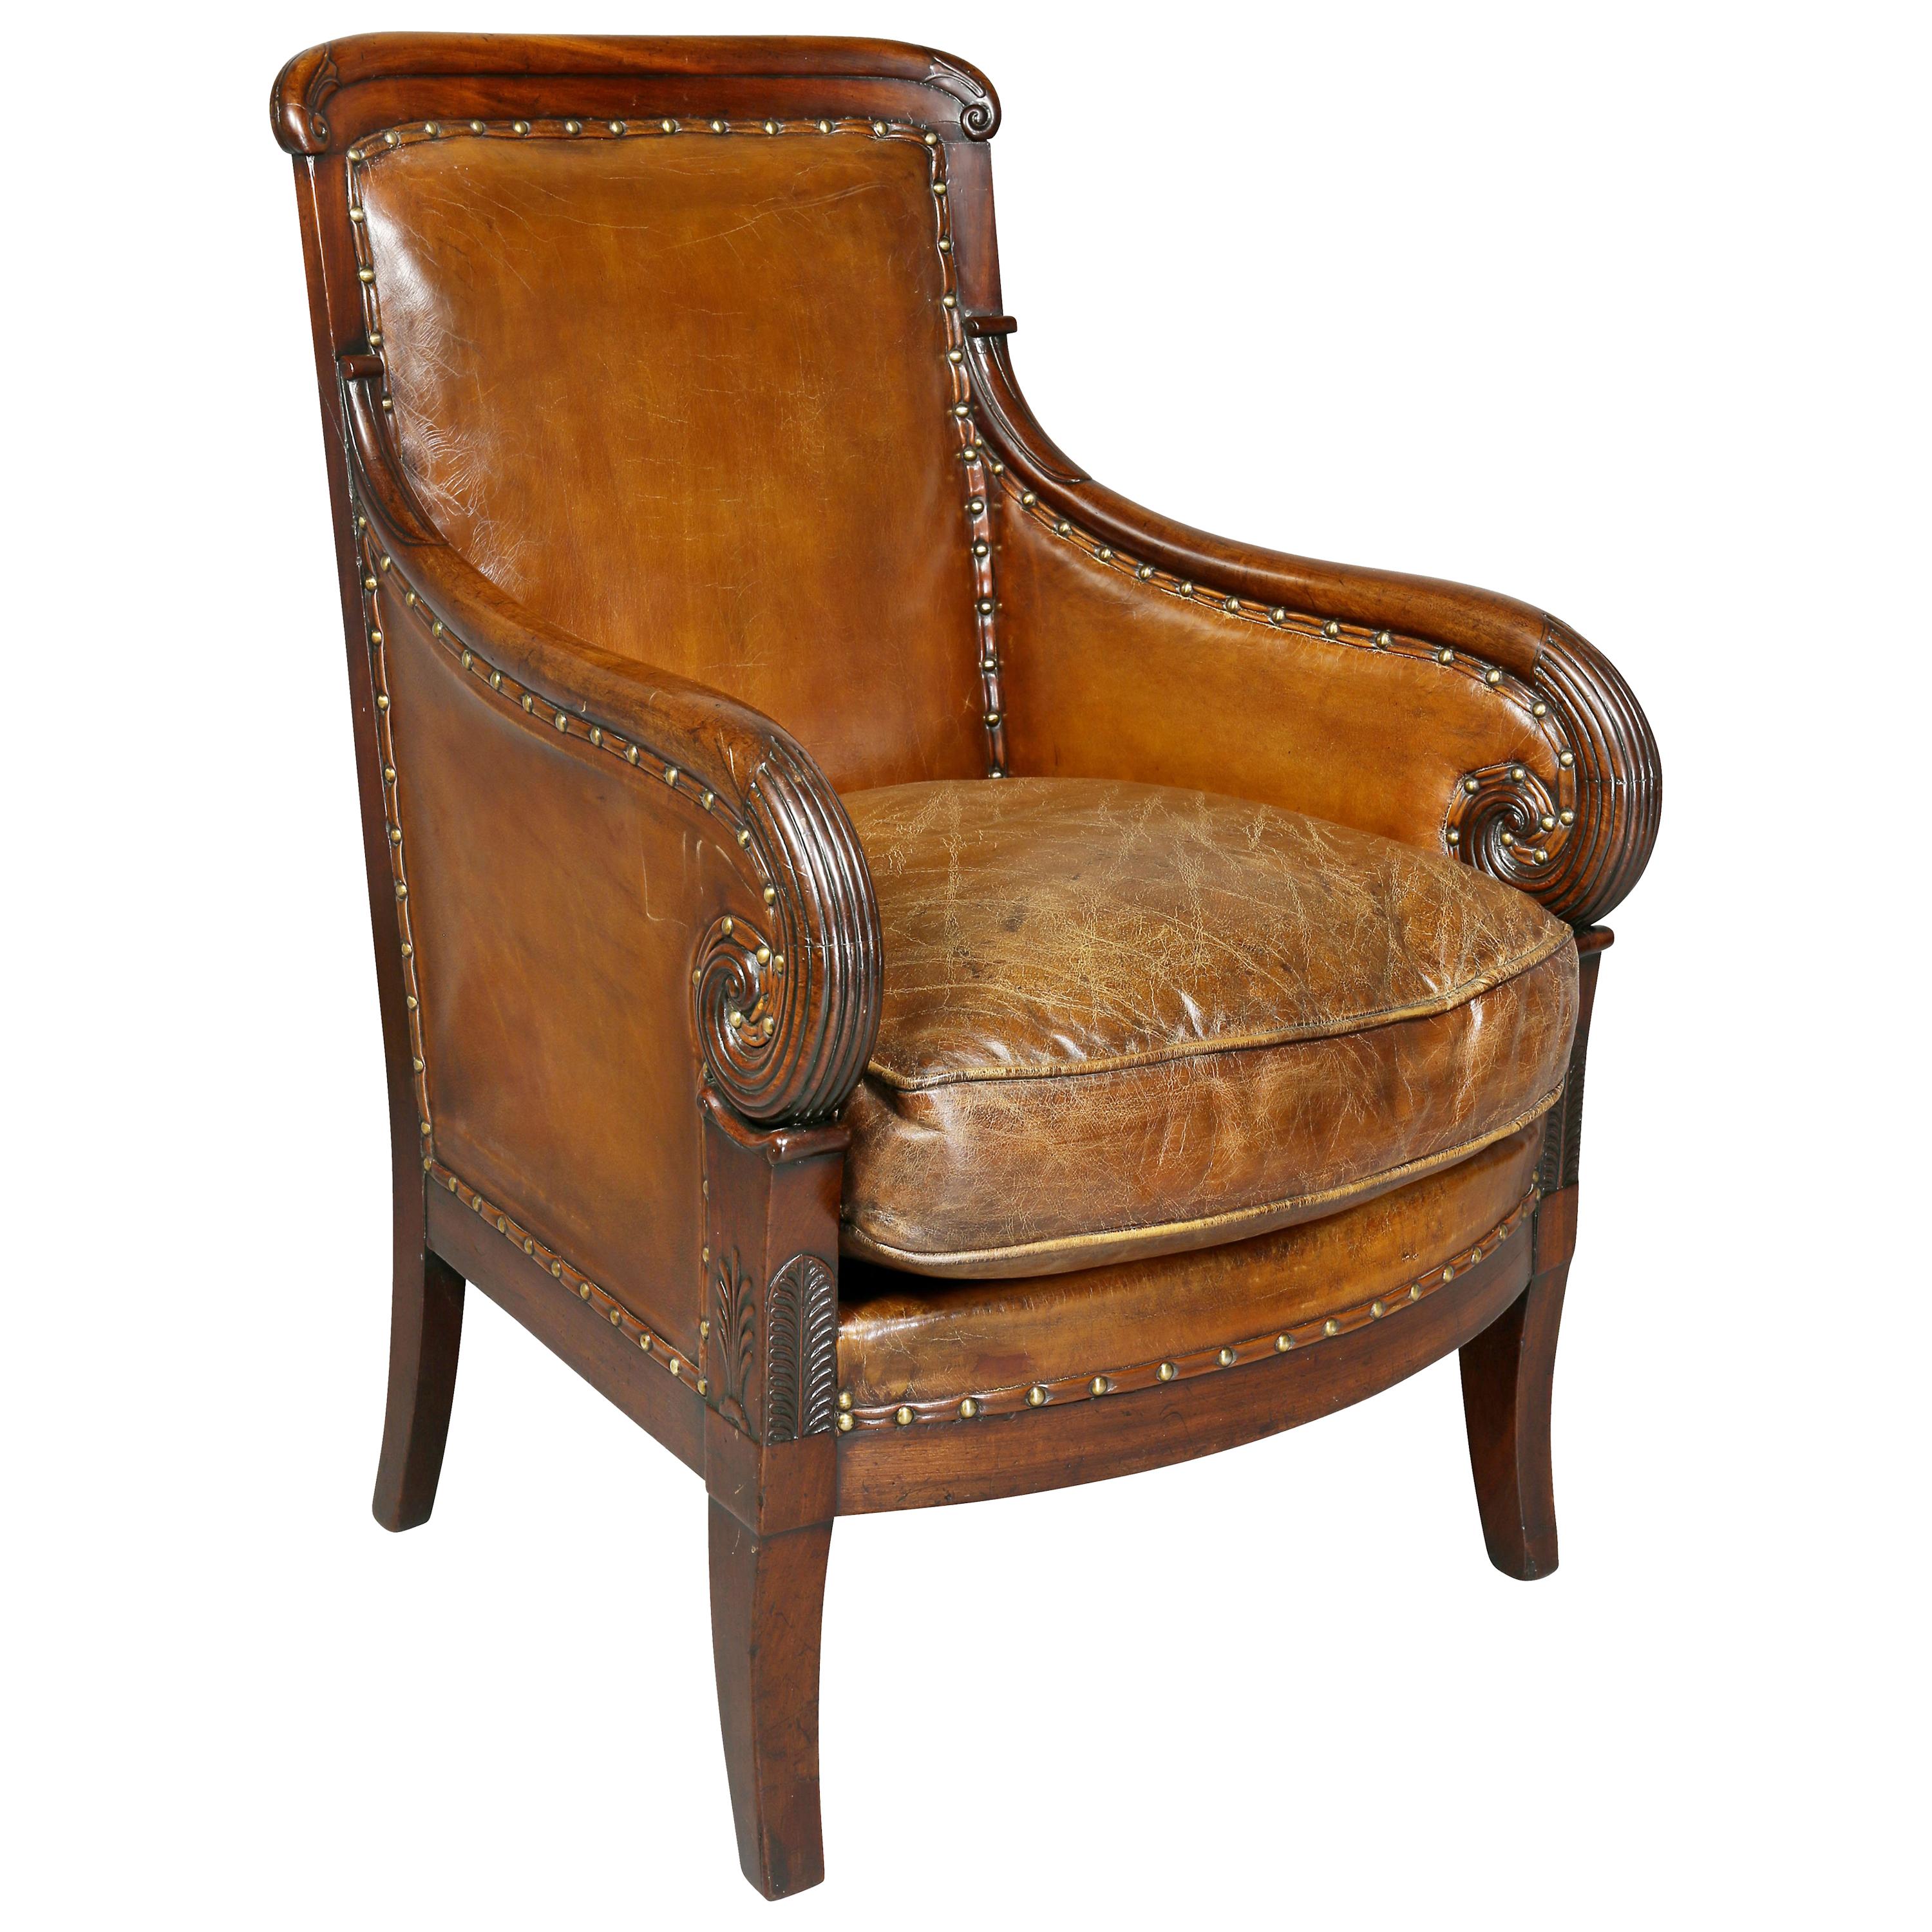 Regency Mahogany and Leather Upholstered Bergere